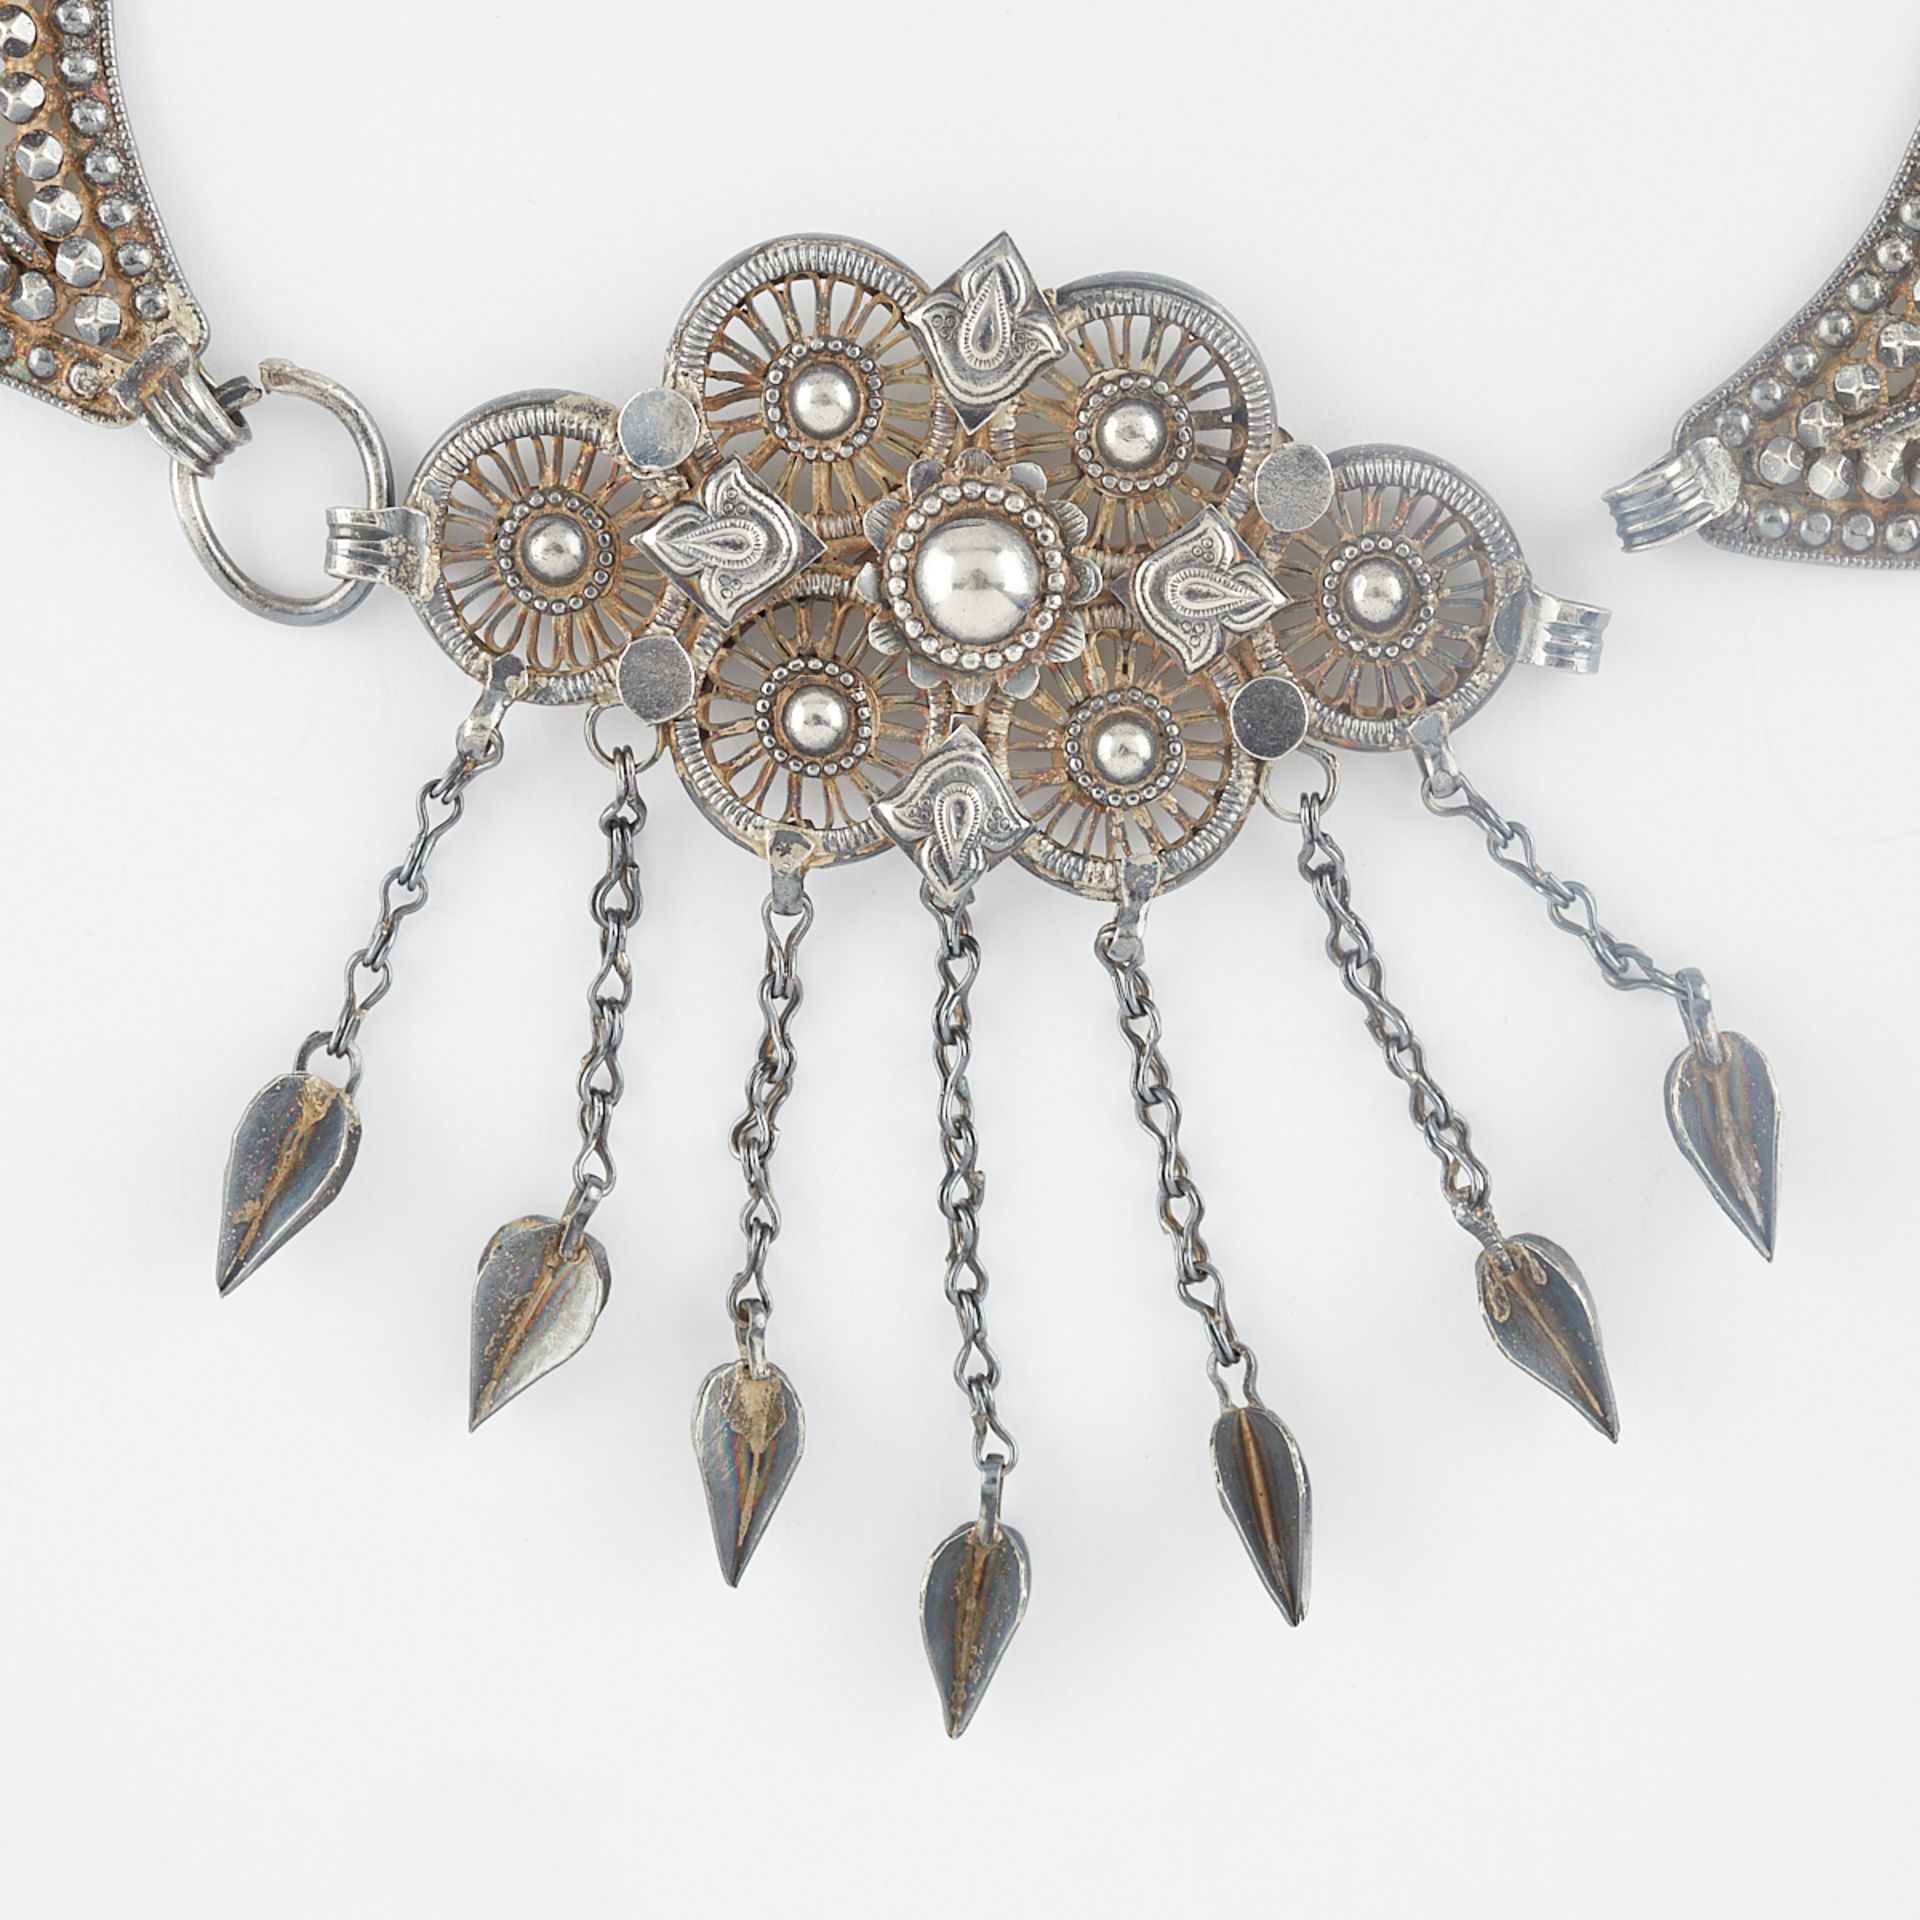 Silver Beaded Necklace Likely Indian - Image 2 of 5